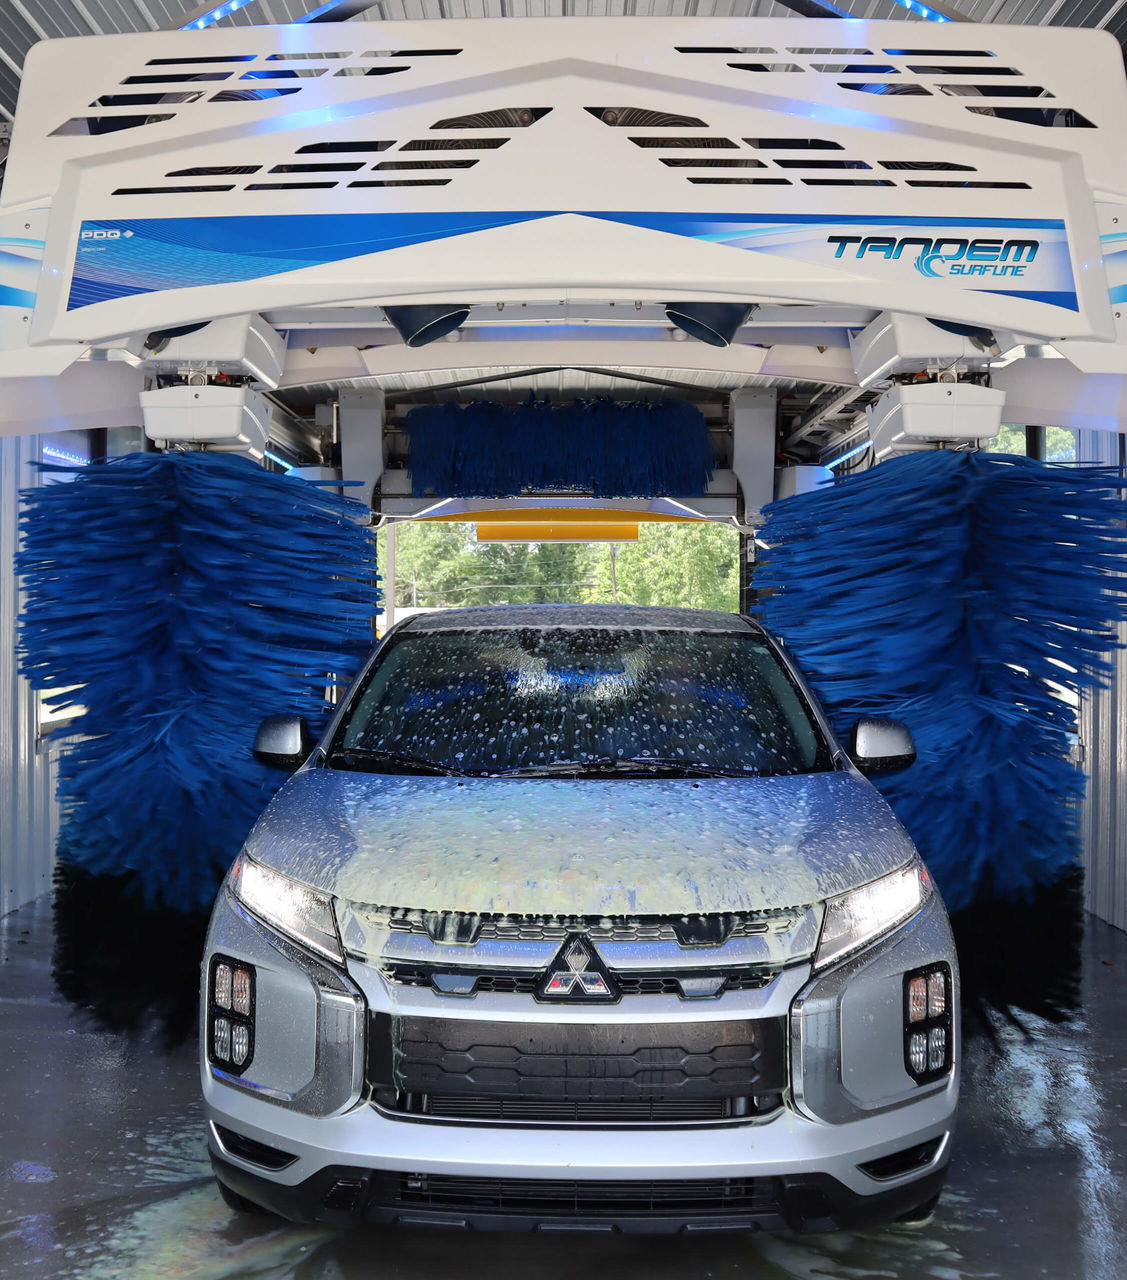 Professional Car Wash Equipment & Systems Supplier